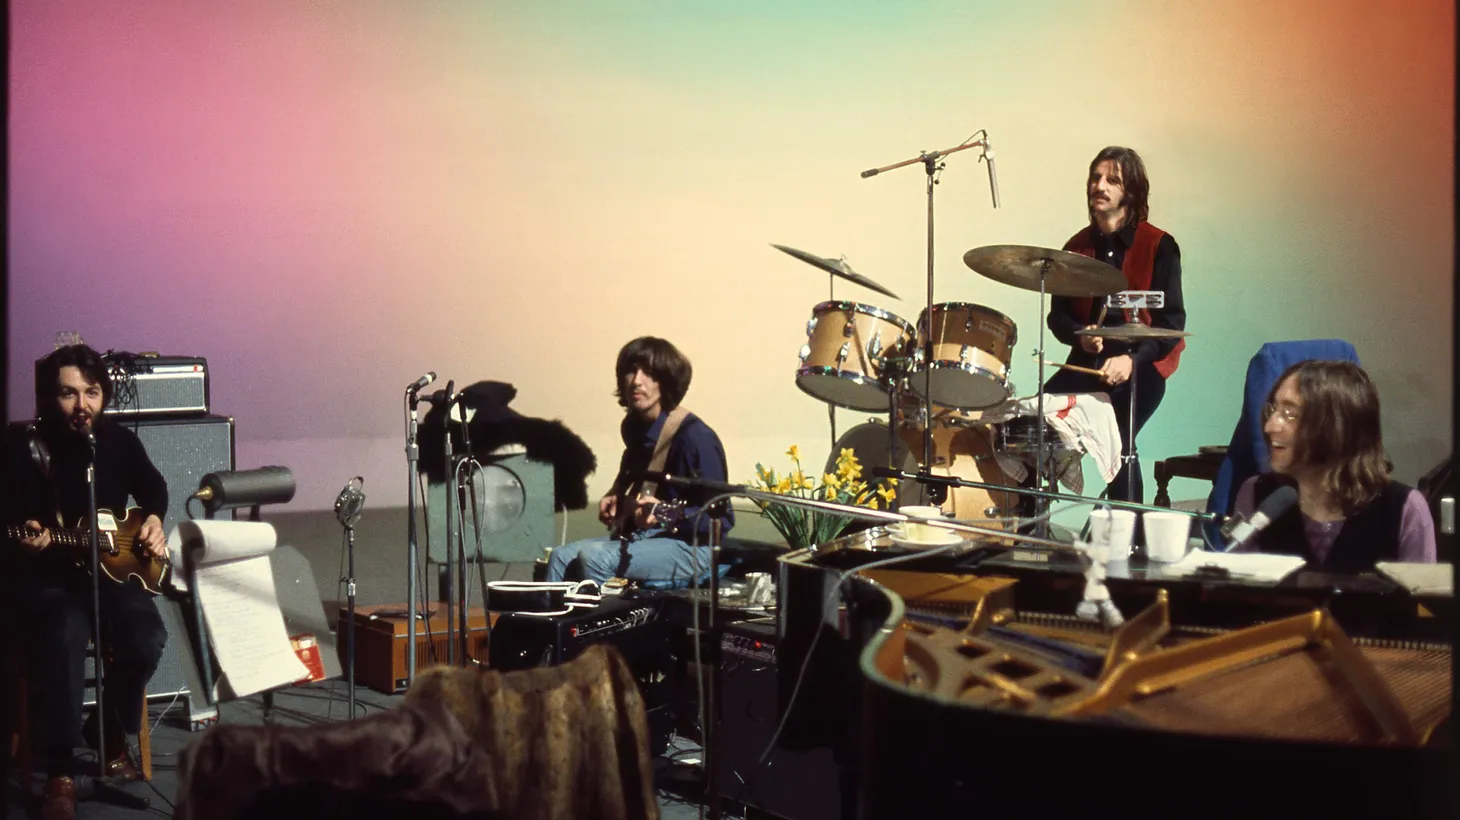 “Paul McCartney said to me at the very beginning, ‘It's your film, do what you want’,” says Peter Jackson. Paul McCartney (left), George Harrison, Ringo Starr and John Lennon, recording the album “Let It Be.”